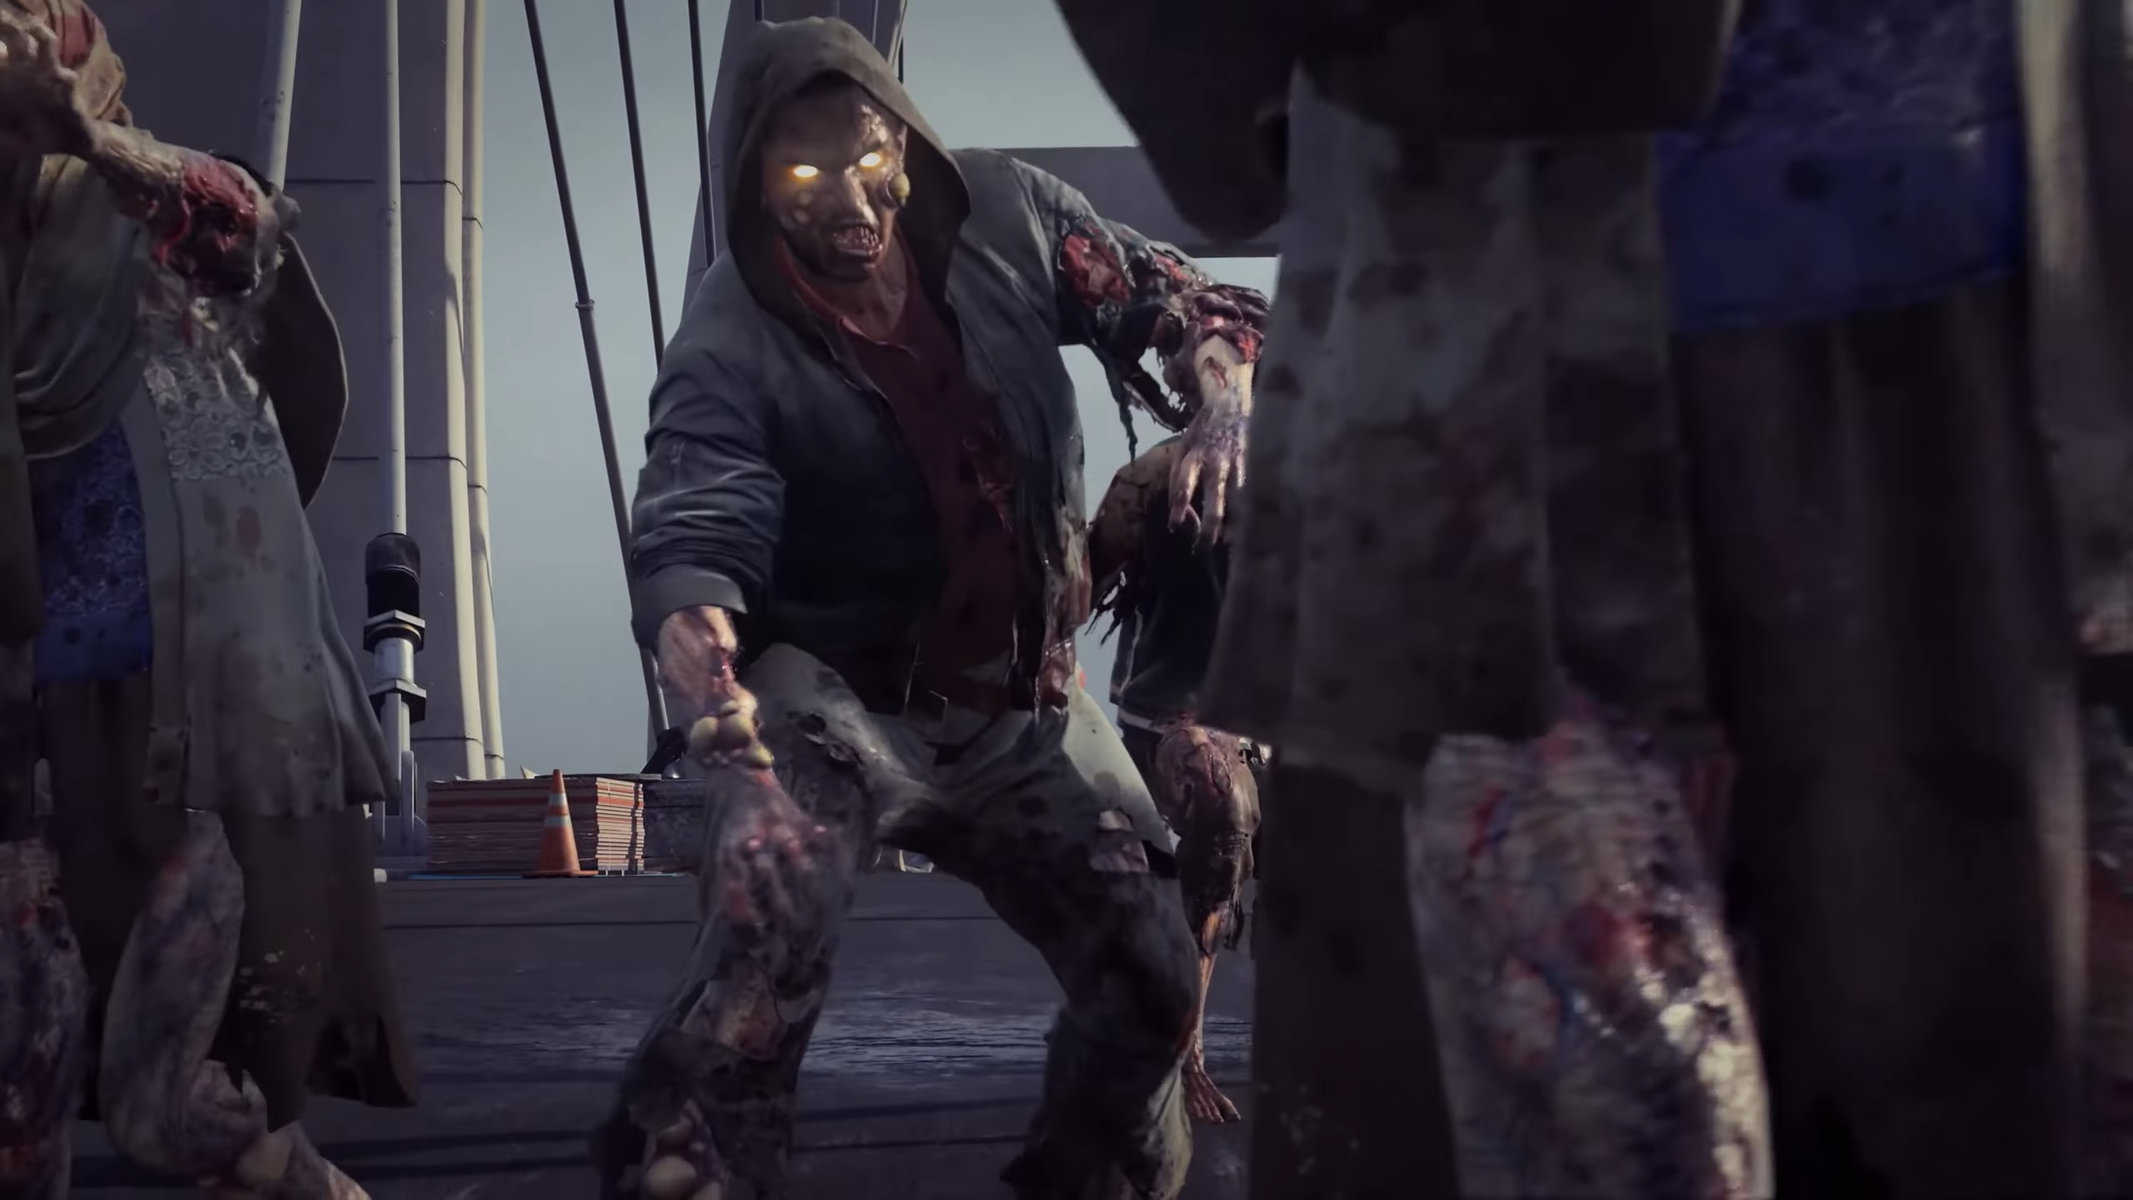 A Former Call of Duty Developer Talks About Canceled Zombie Game